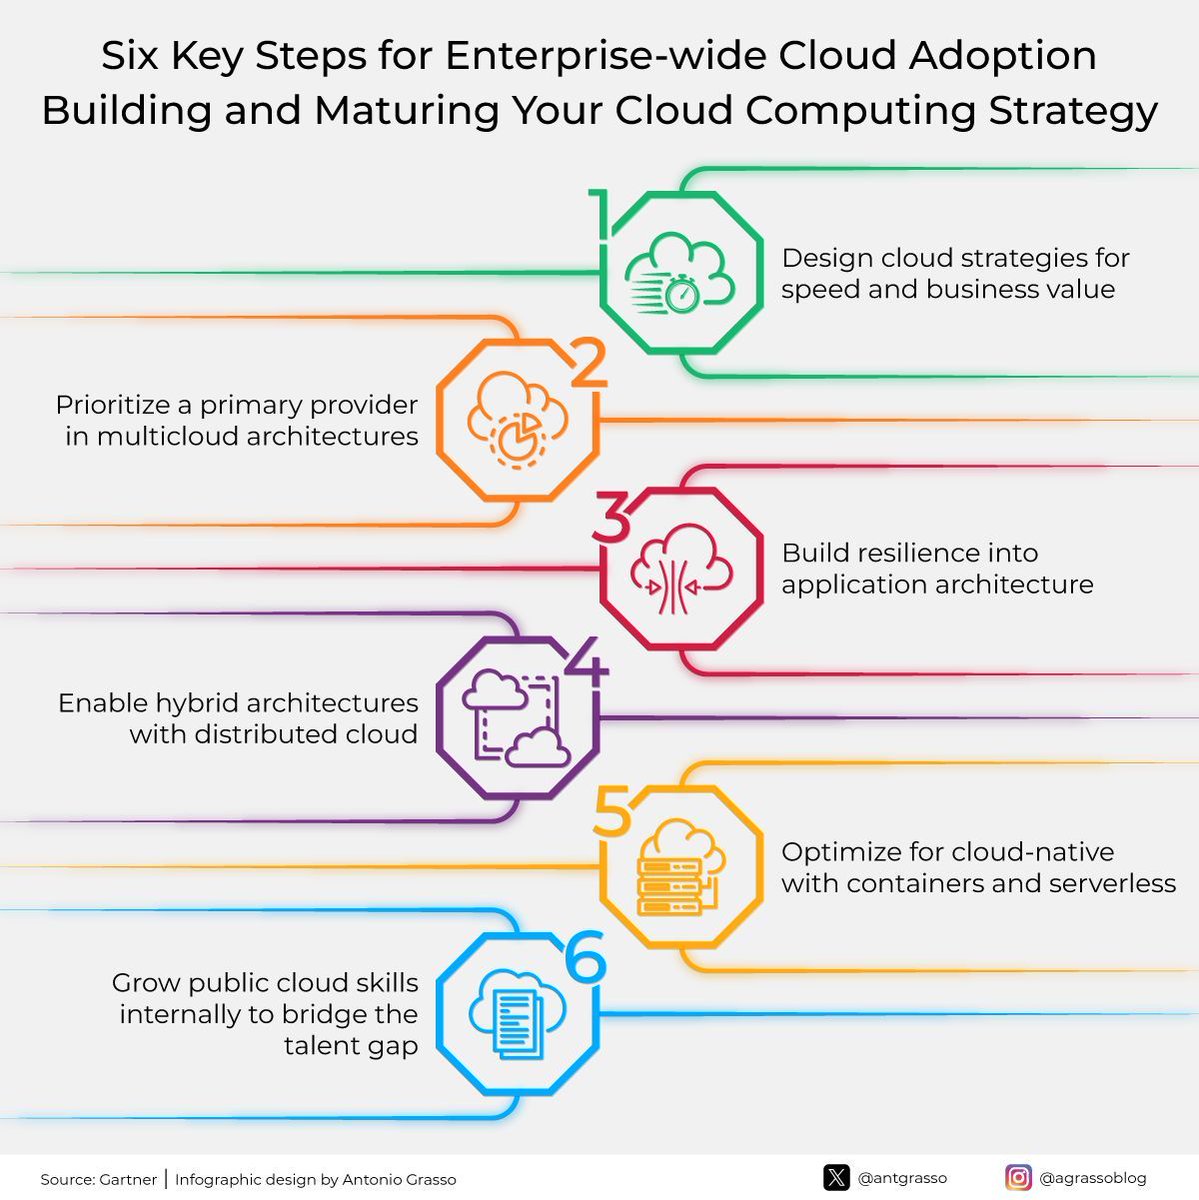 Embracing cloud computing enhances agility and innovation. Strategizing for speed and value, resilience in architecture, and fostering cloud skills are crucial to growth and efficiency in our business operations.

Rt @antgrasso #CloudComputing